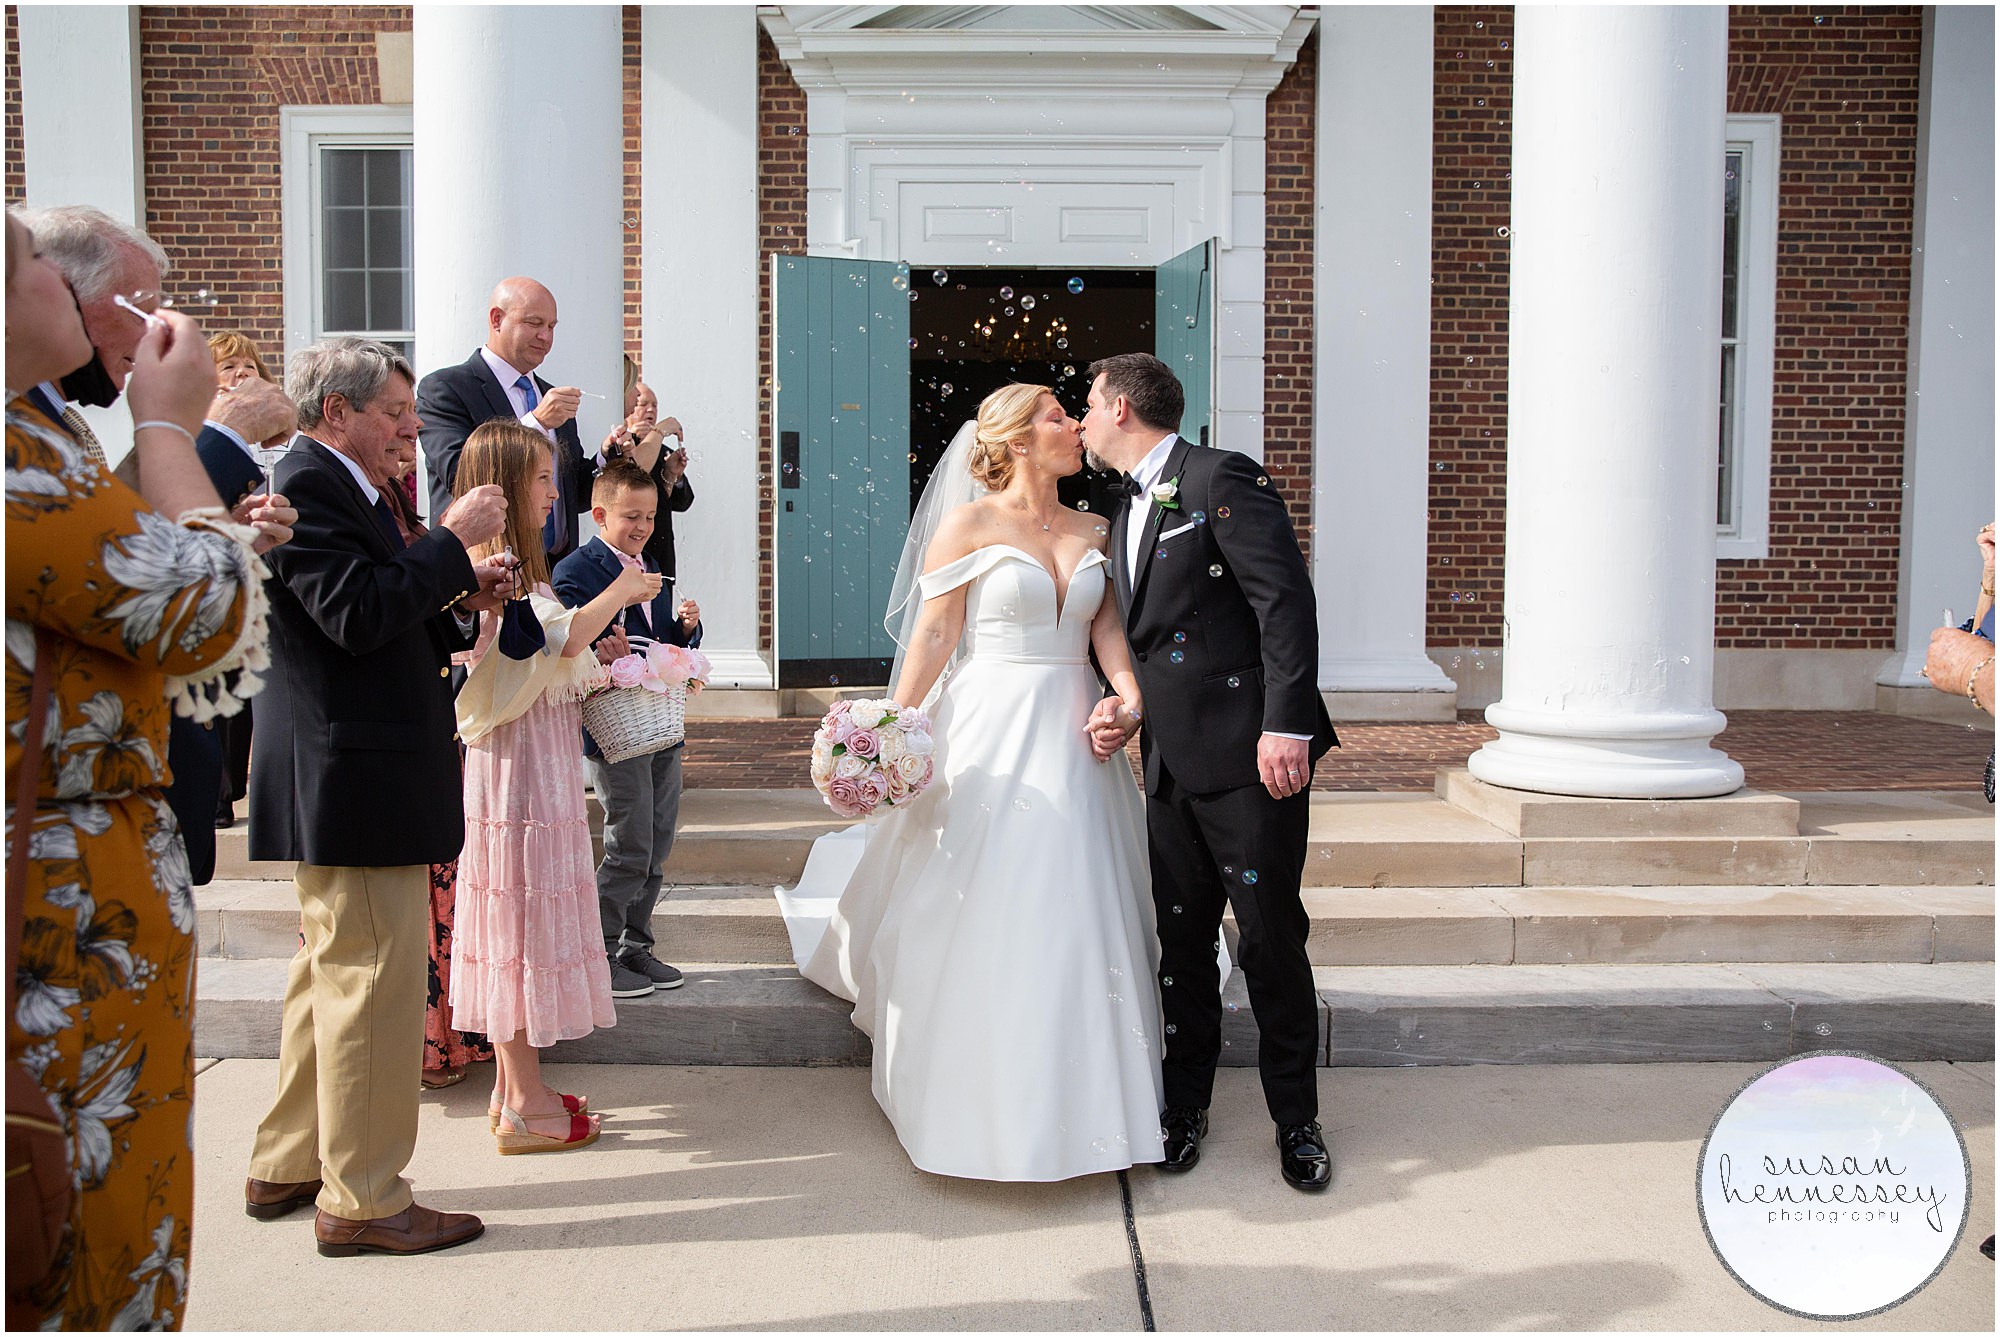 Planning a Micro Wedding? A bubble exit is a great way to get more variety in your photos!